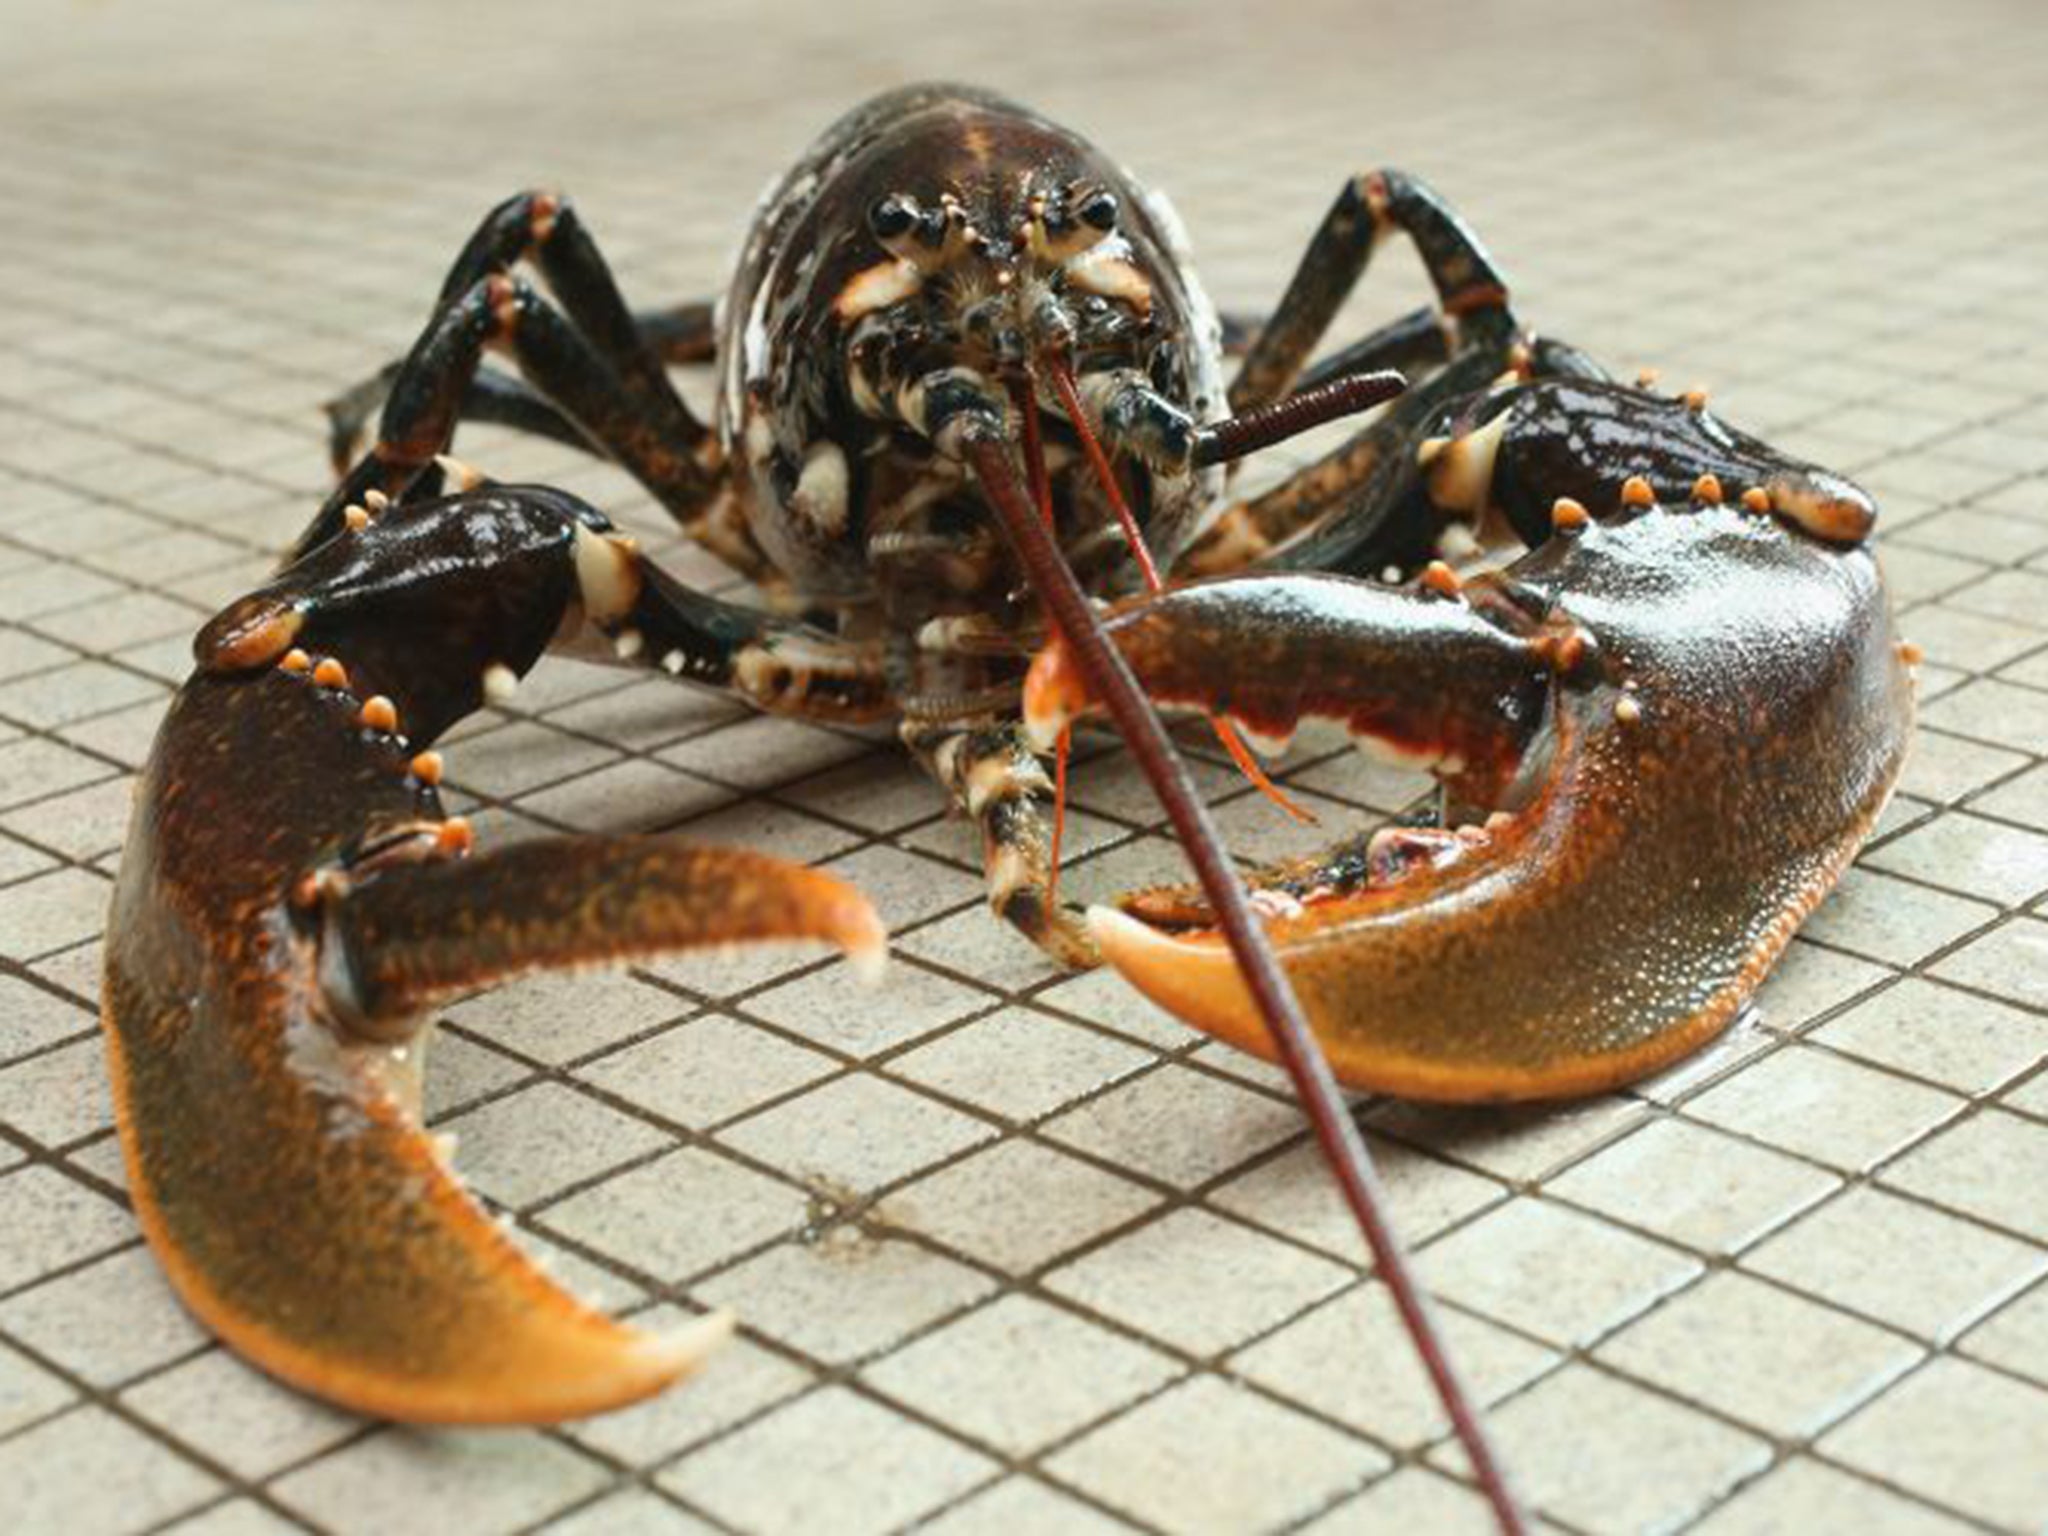 The lobster’s appeal to the British male may lie with its menacing claws rather than its reputation for mating for life